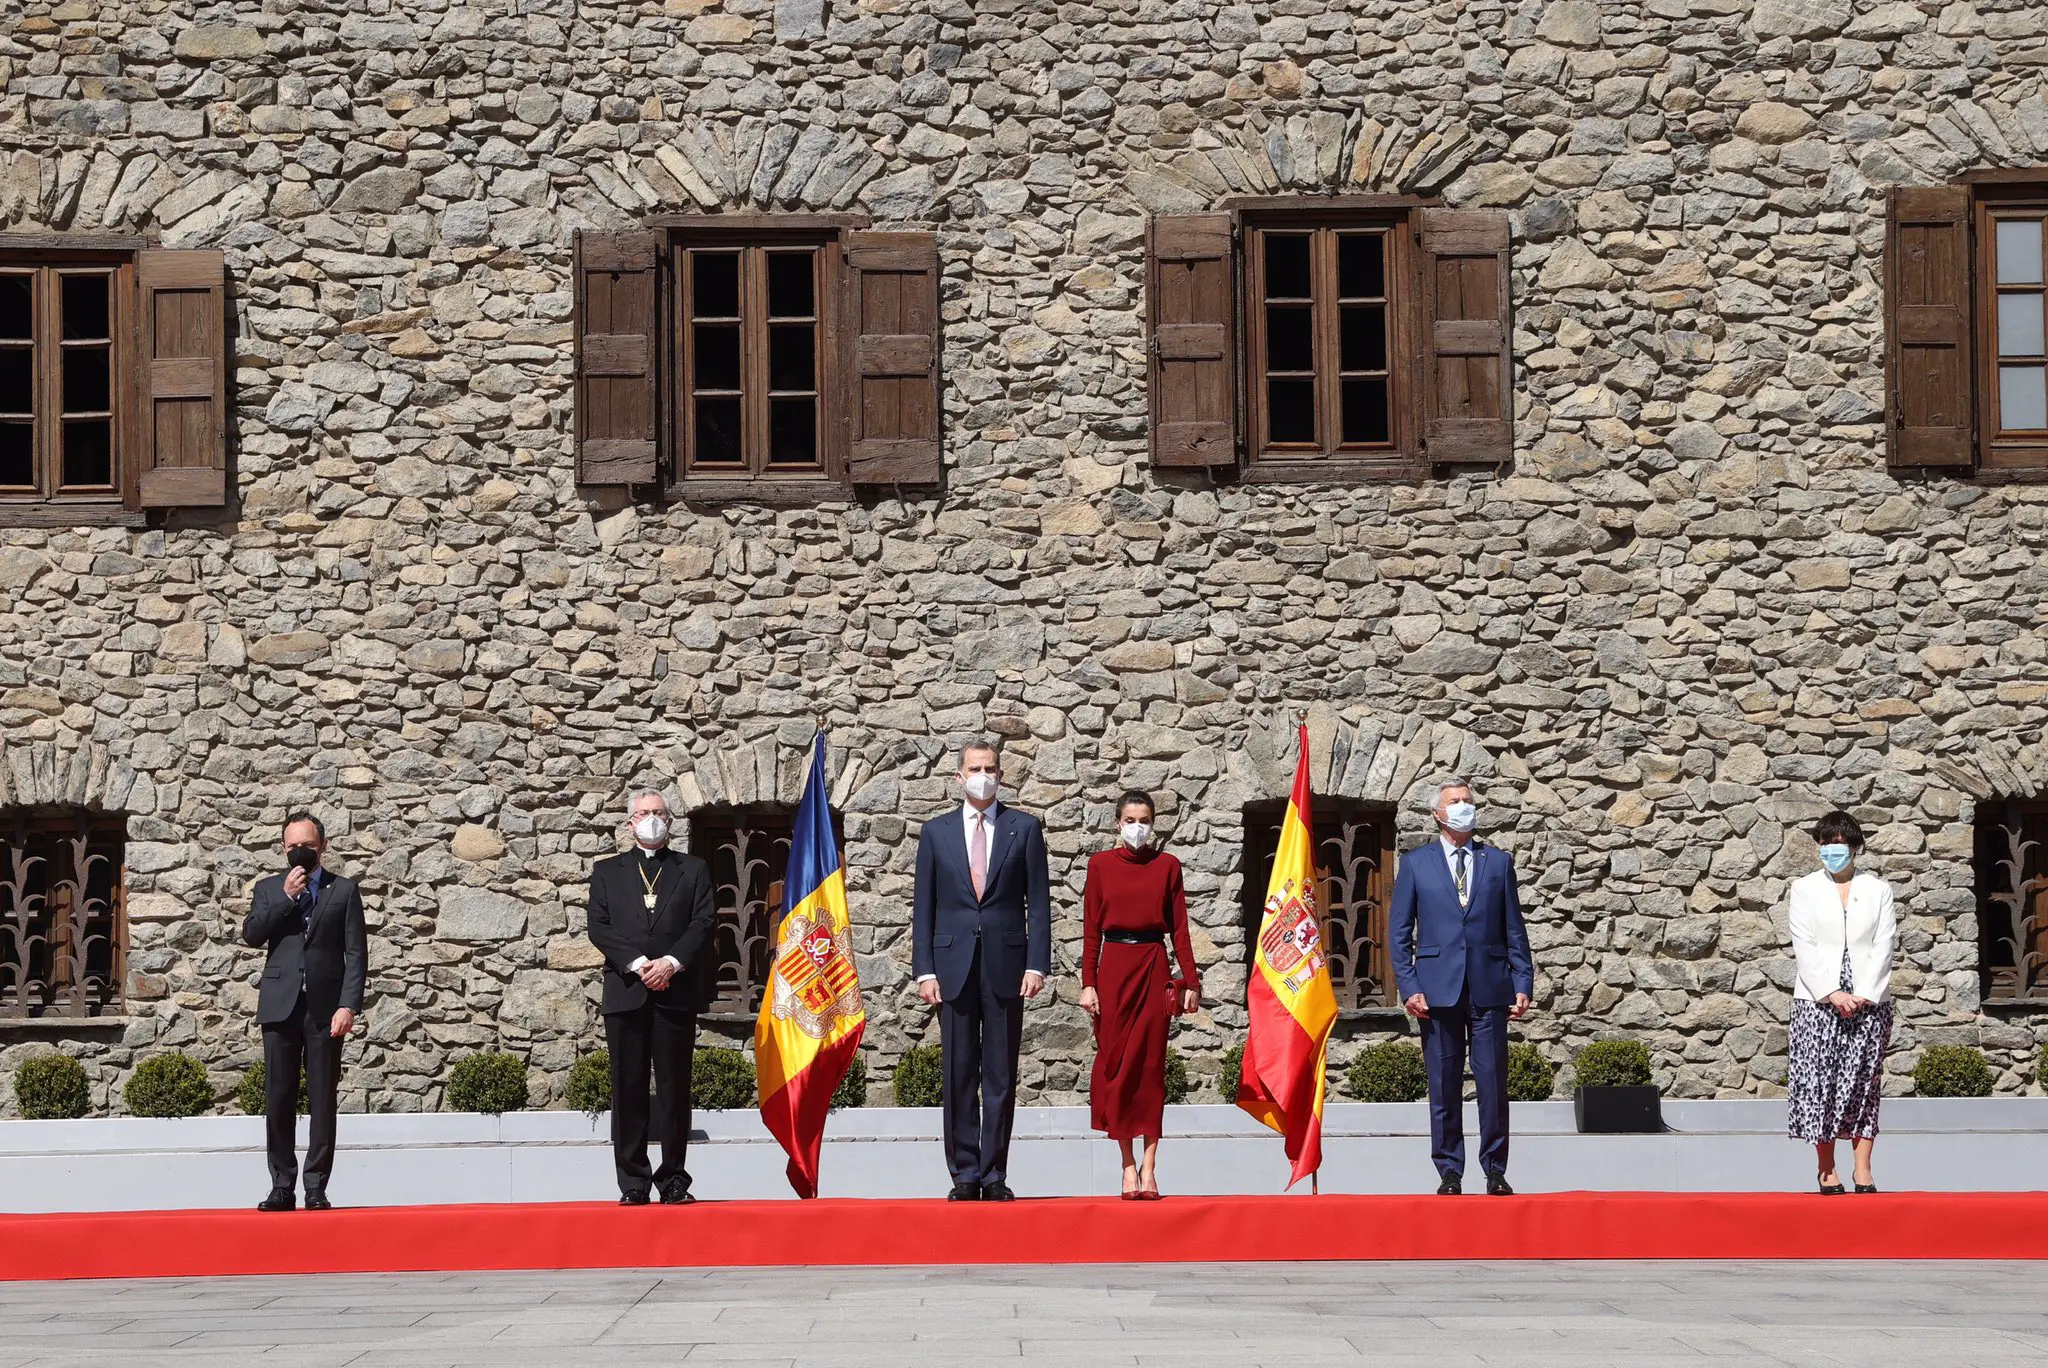 King Felipe and Queen Letizia during the official welcome in Andorra